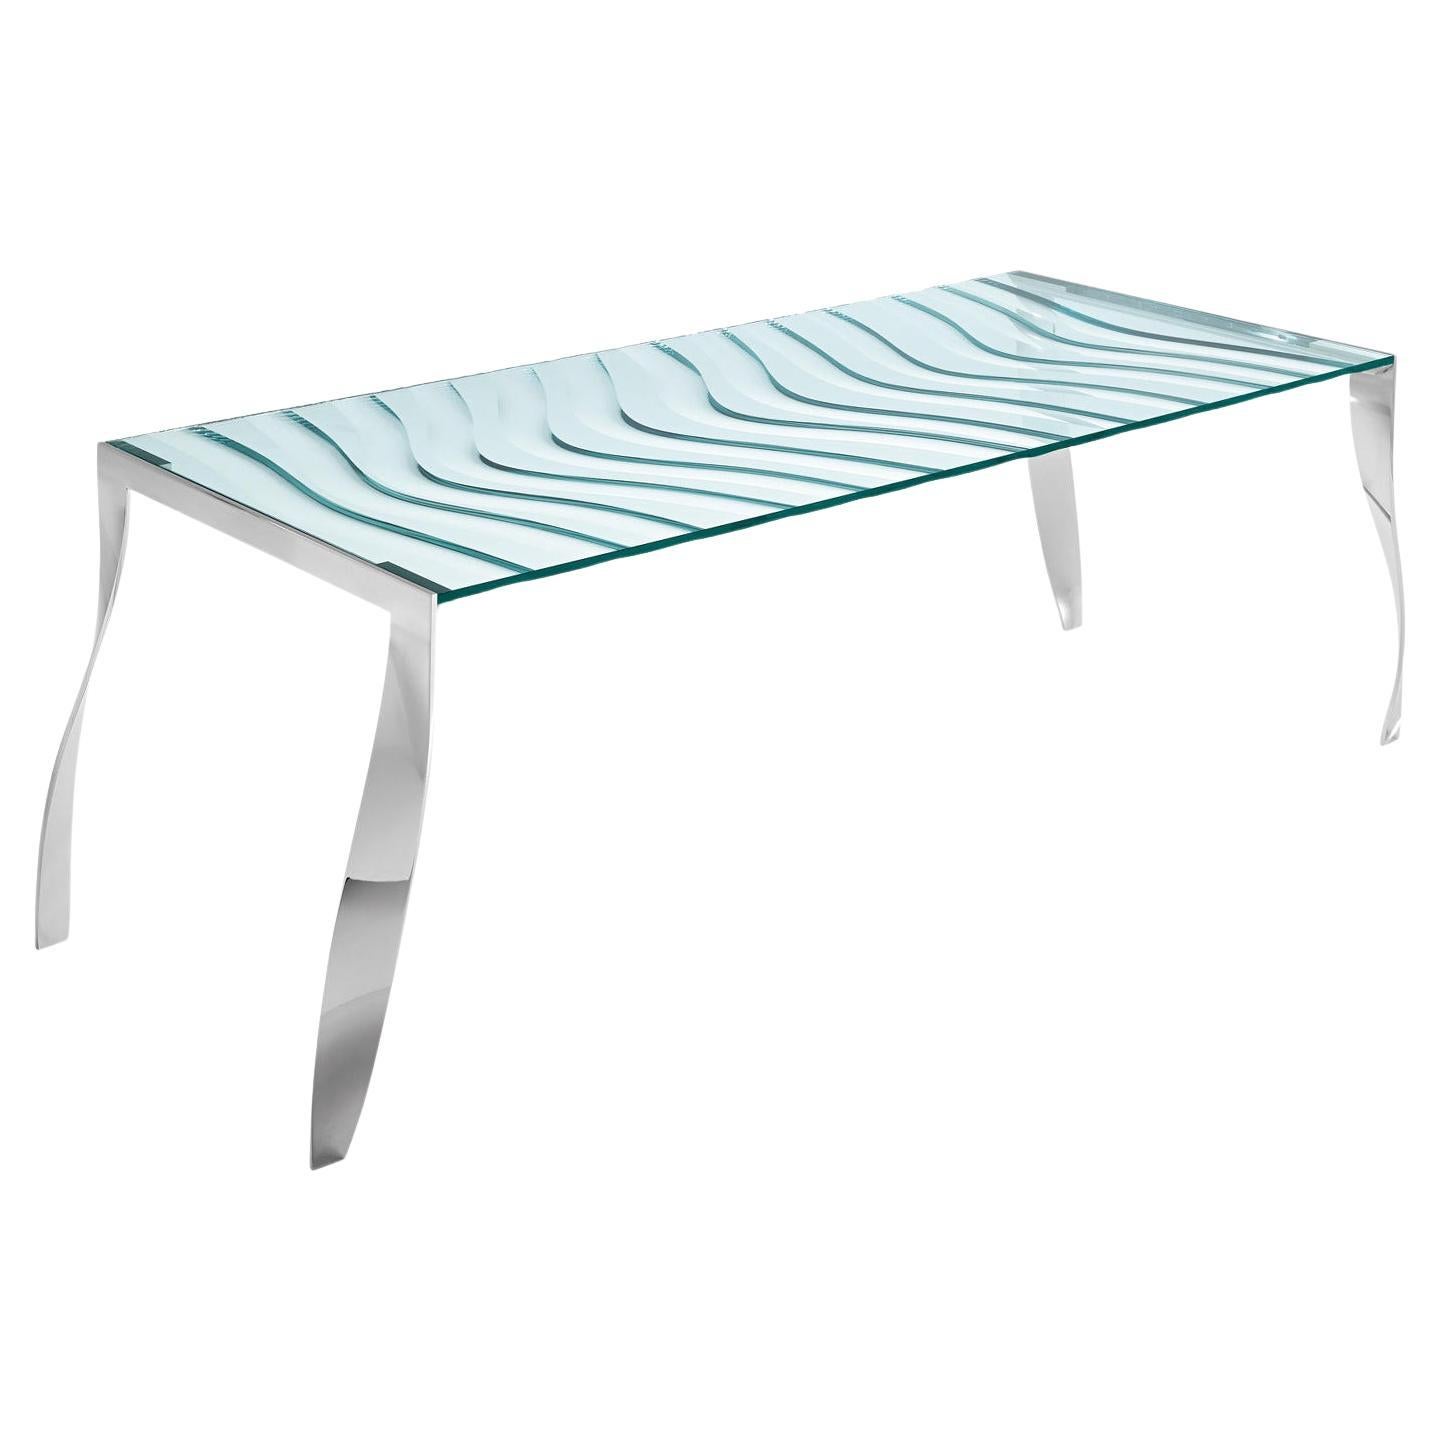 Ondulate Glass Dining Table For Sale